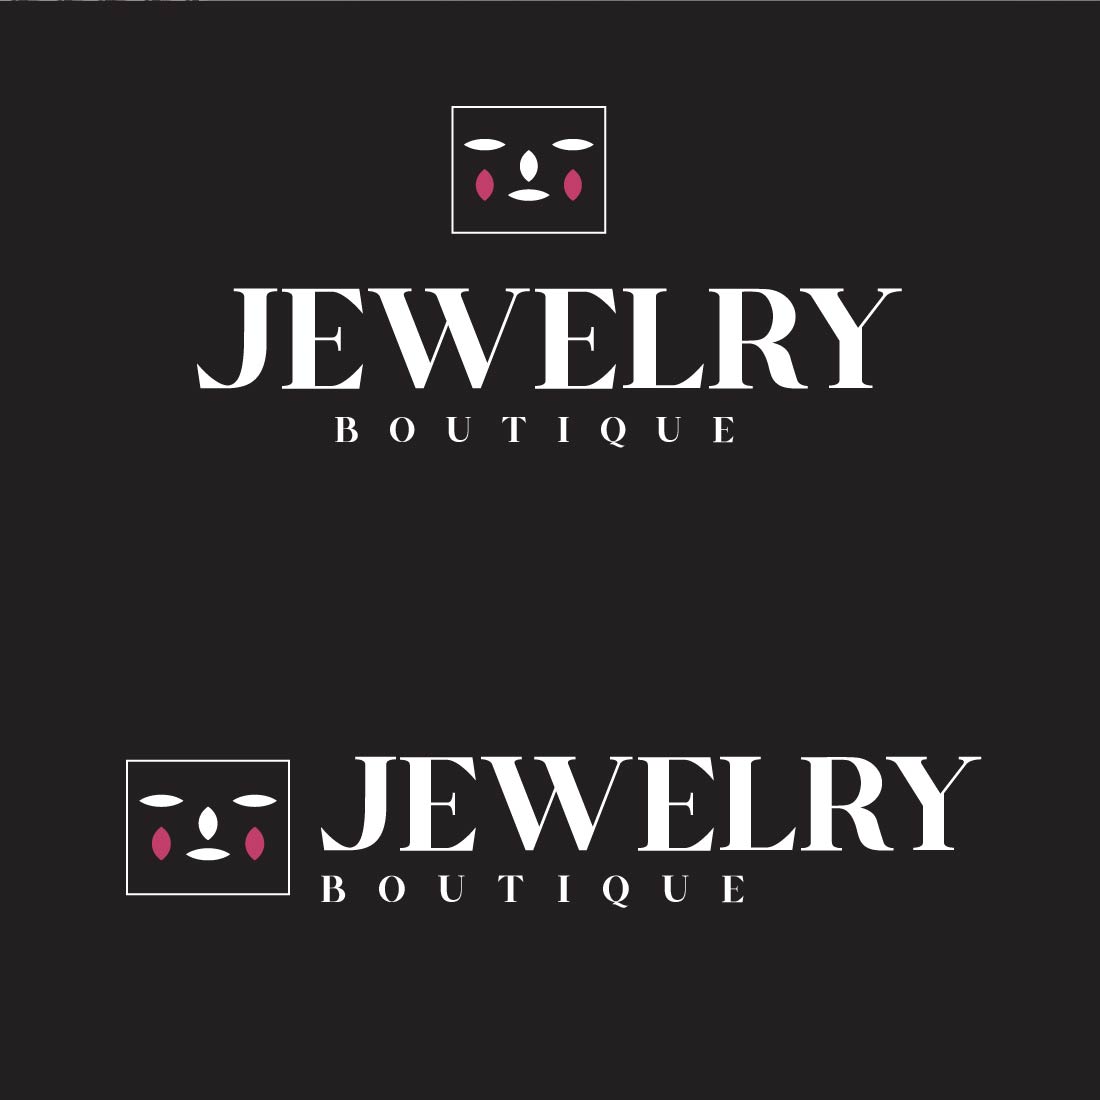 Fashion Jewelry Logo Vector with black background.